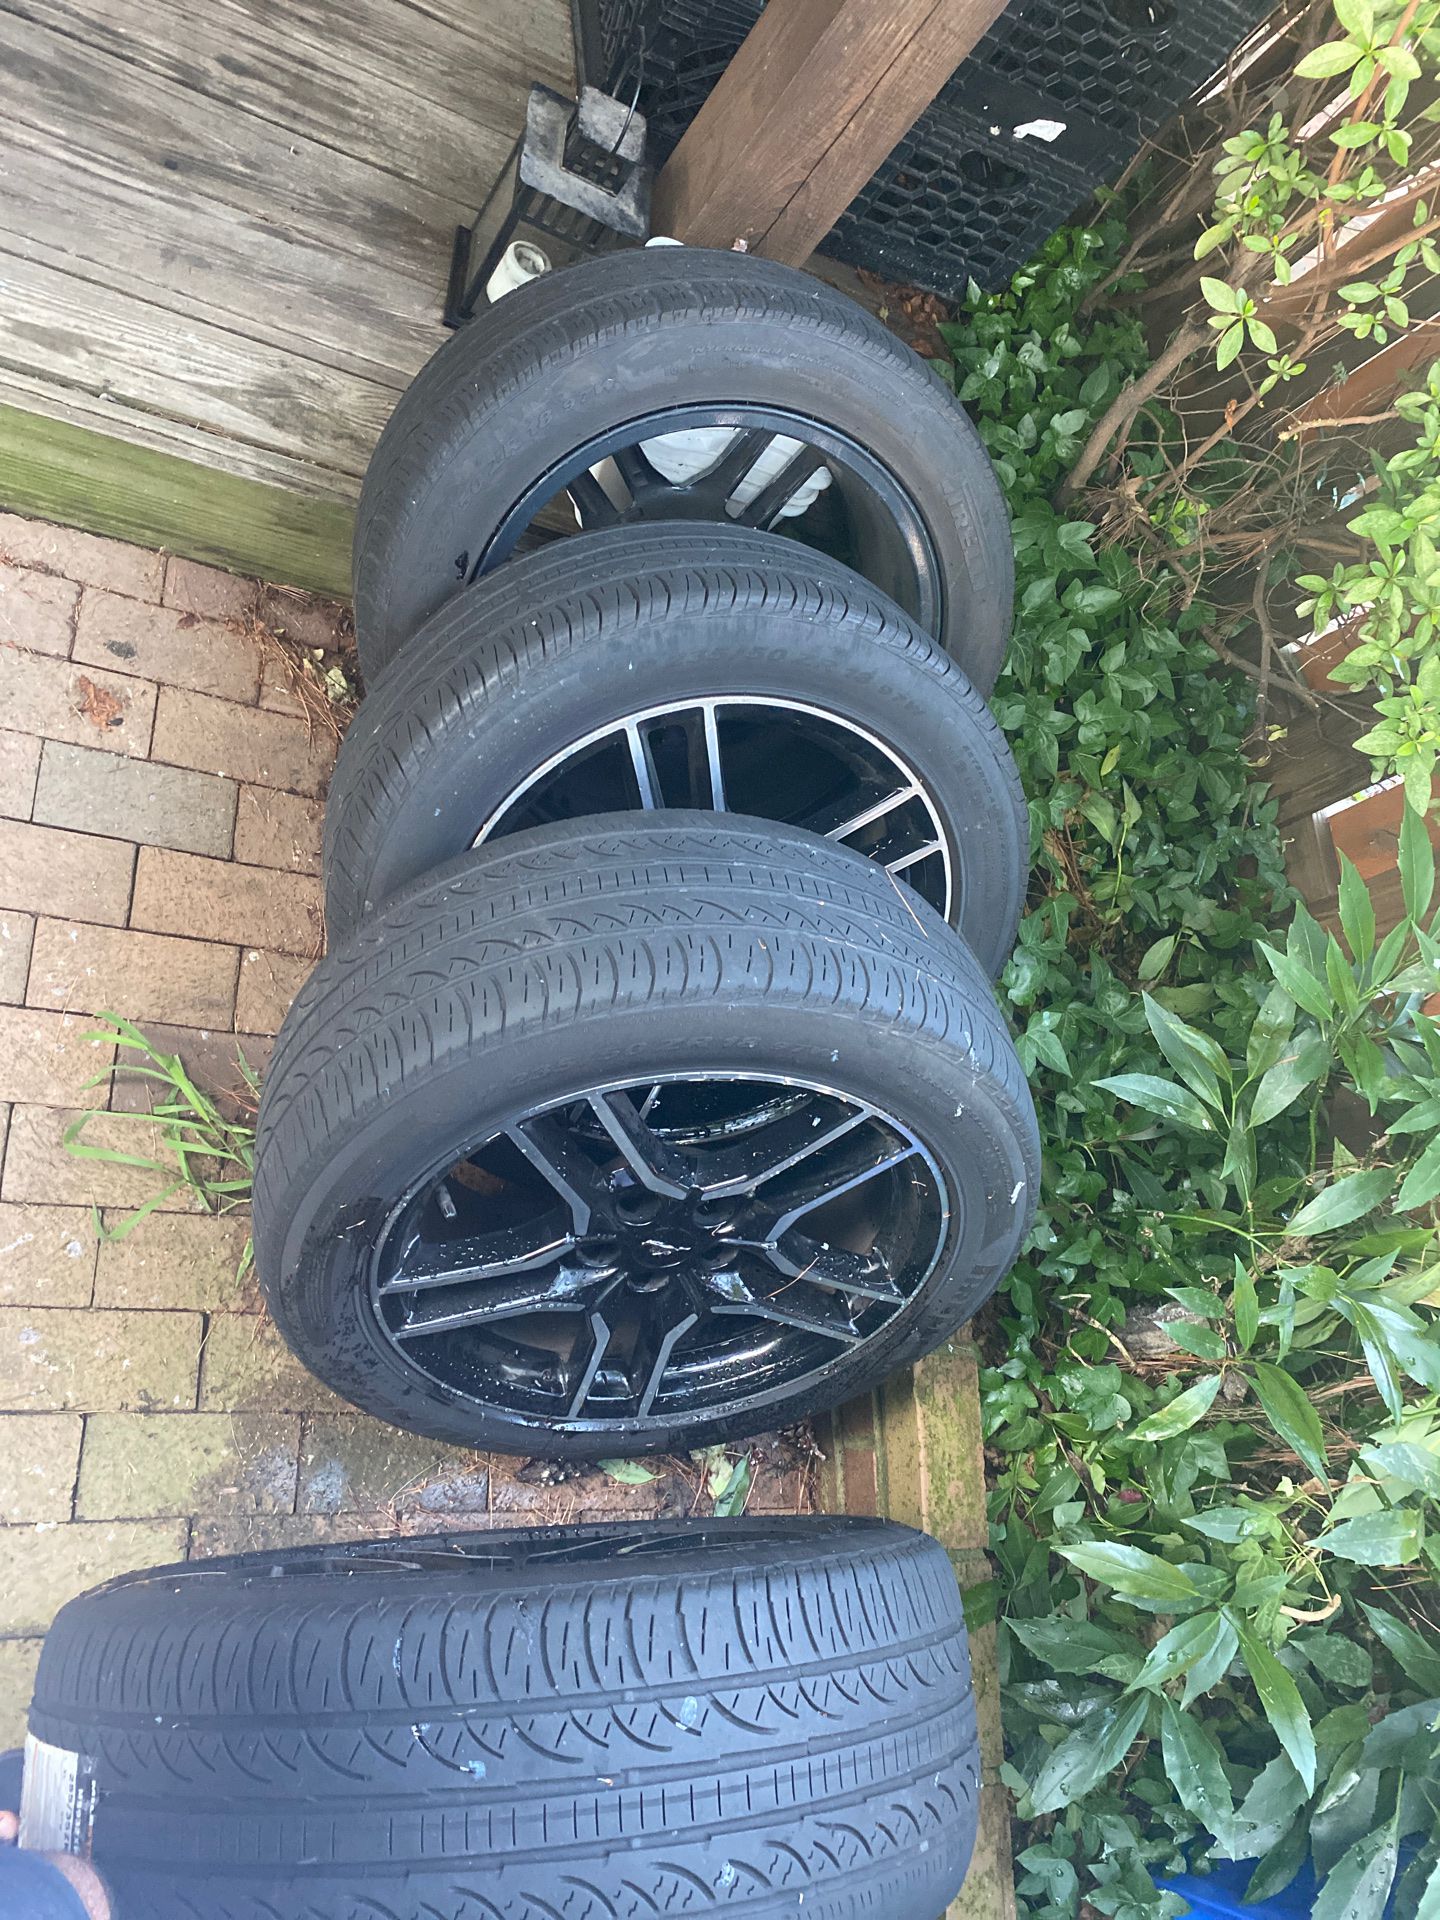 Mustang 2018 OEM rims and tires included. Up for negotiation as well.